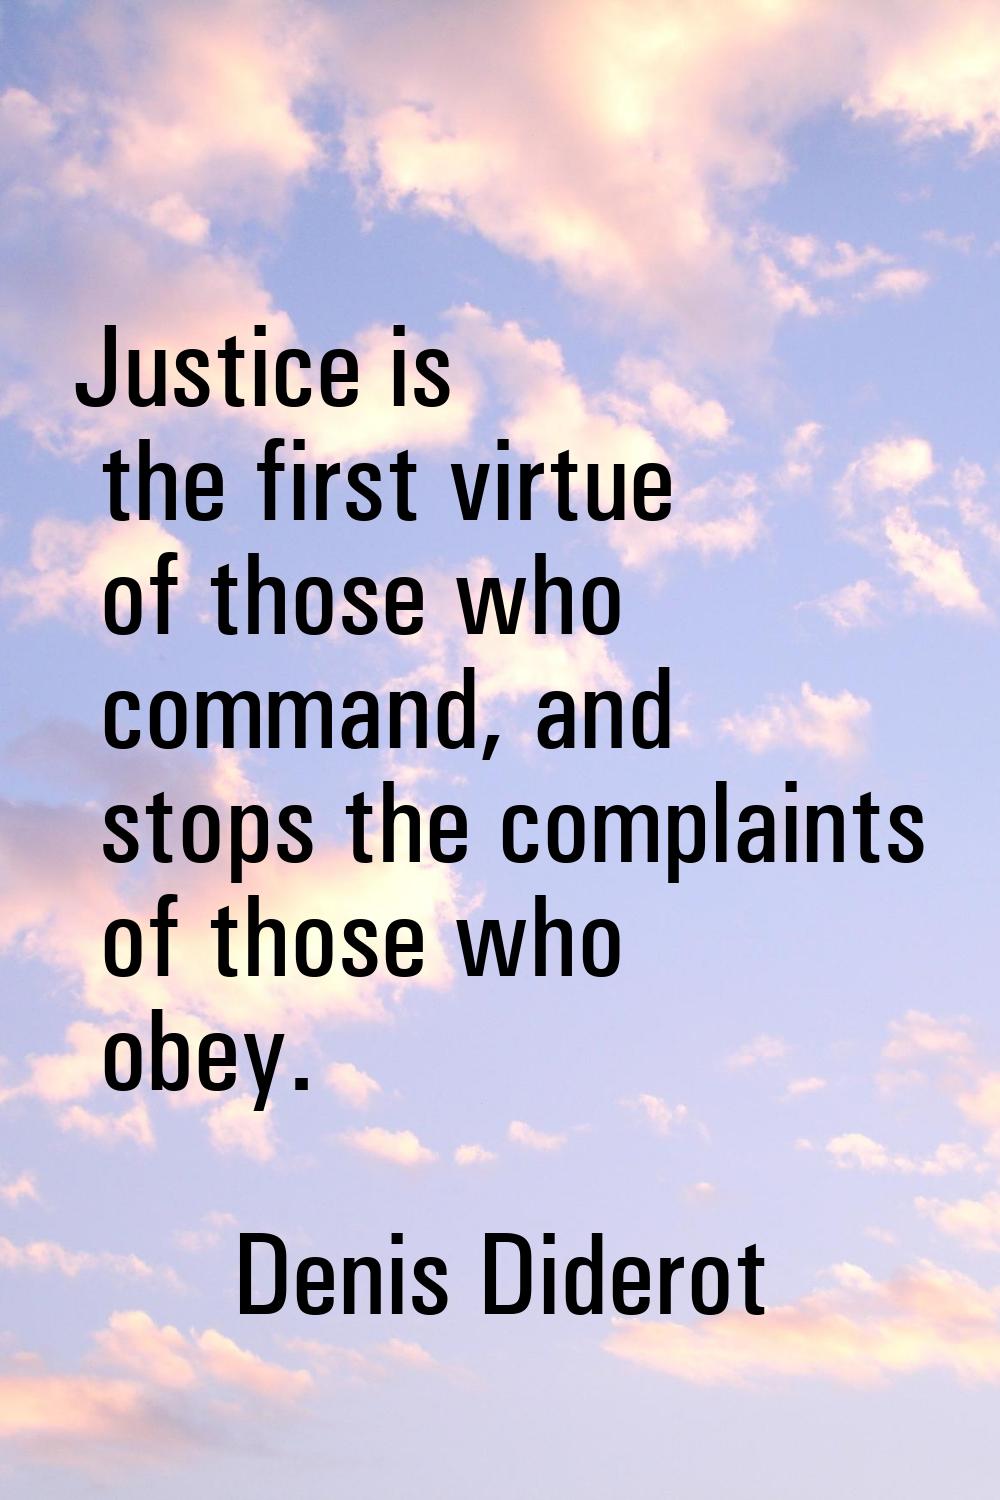 Justice is the first virtue of those who command, and stops the complaints of those who obey.